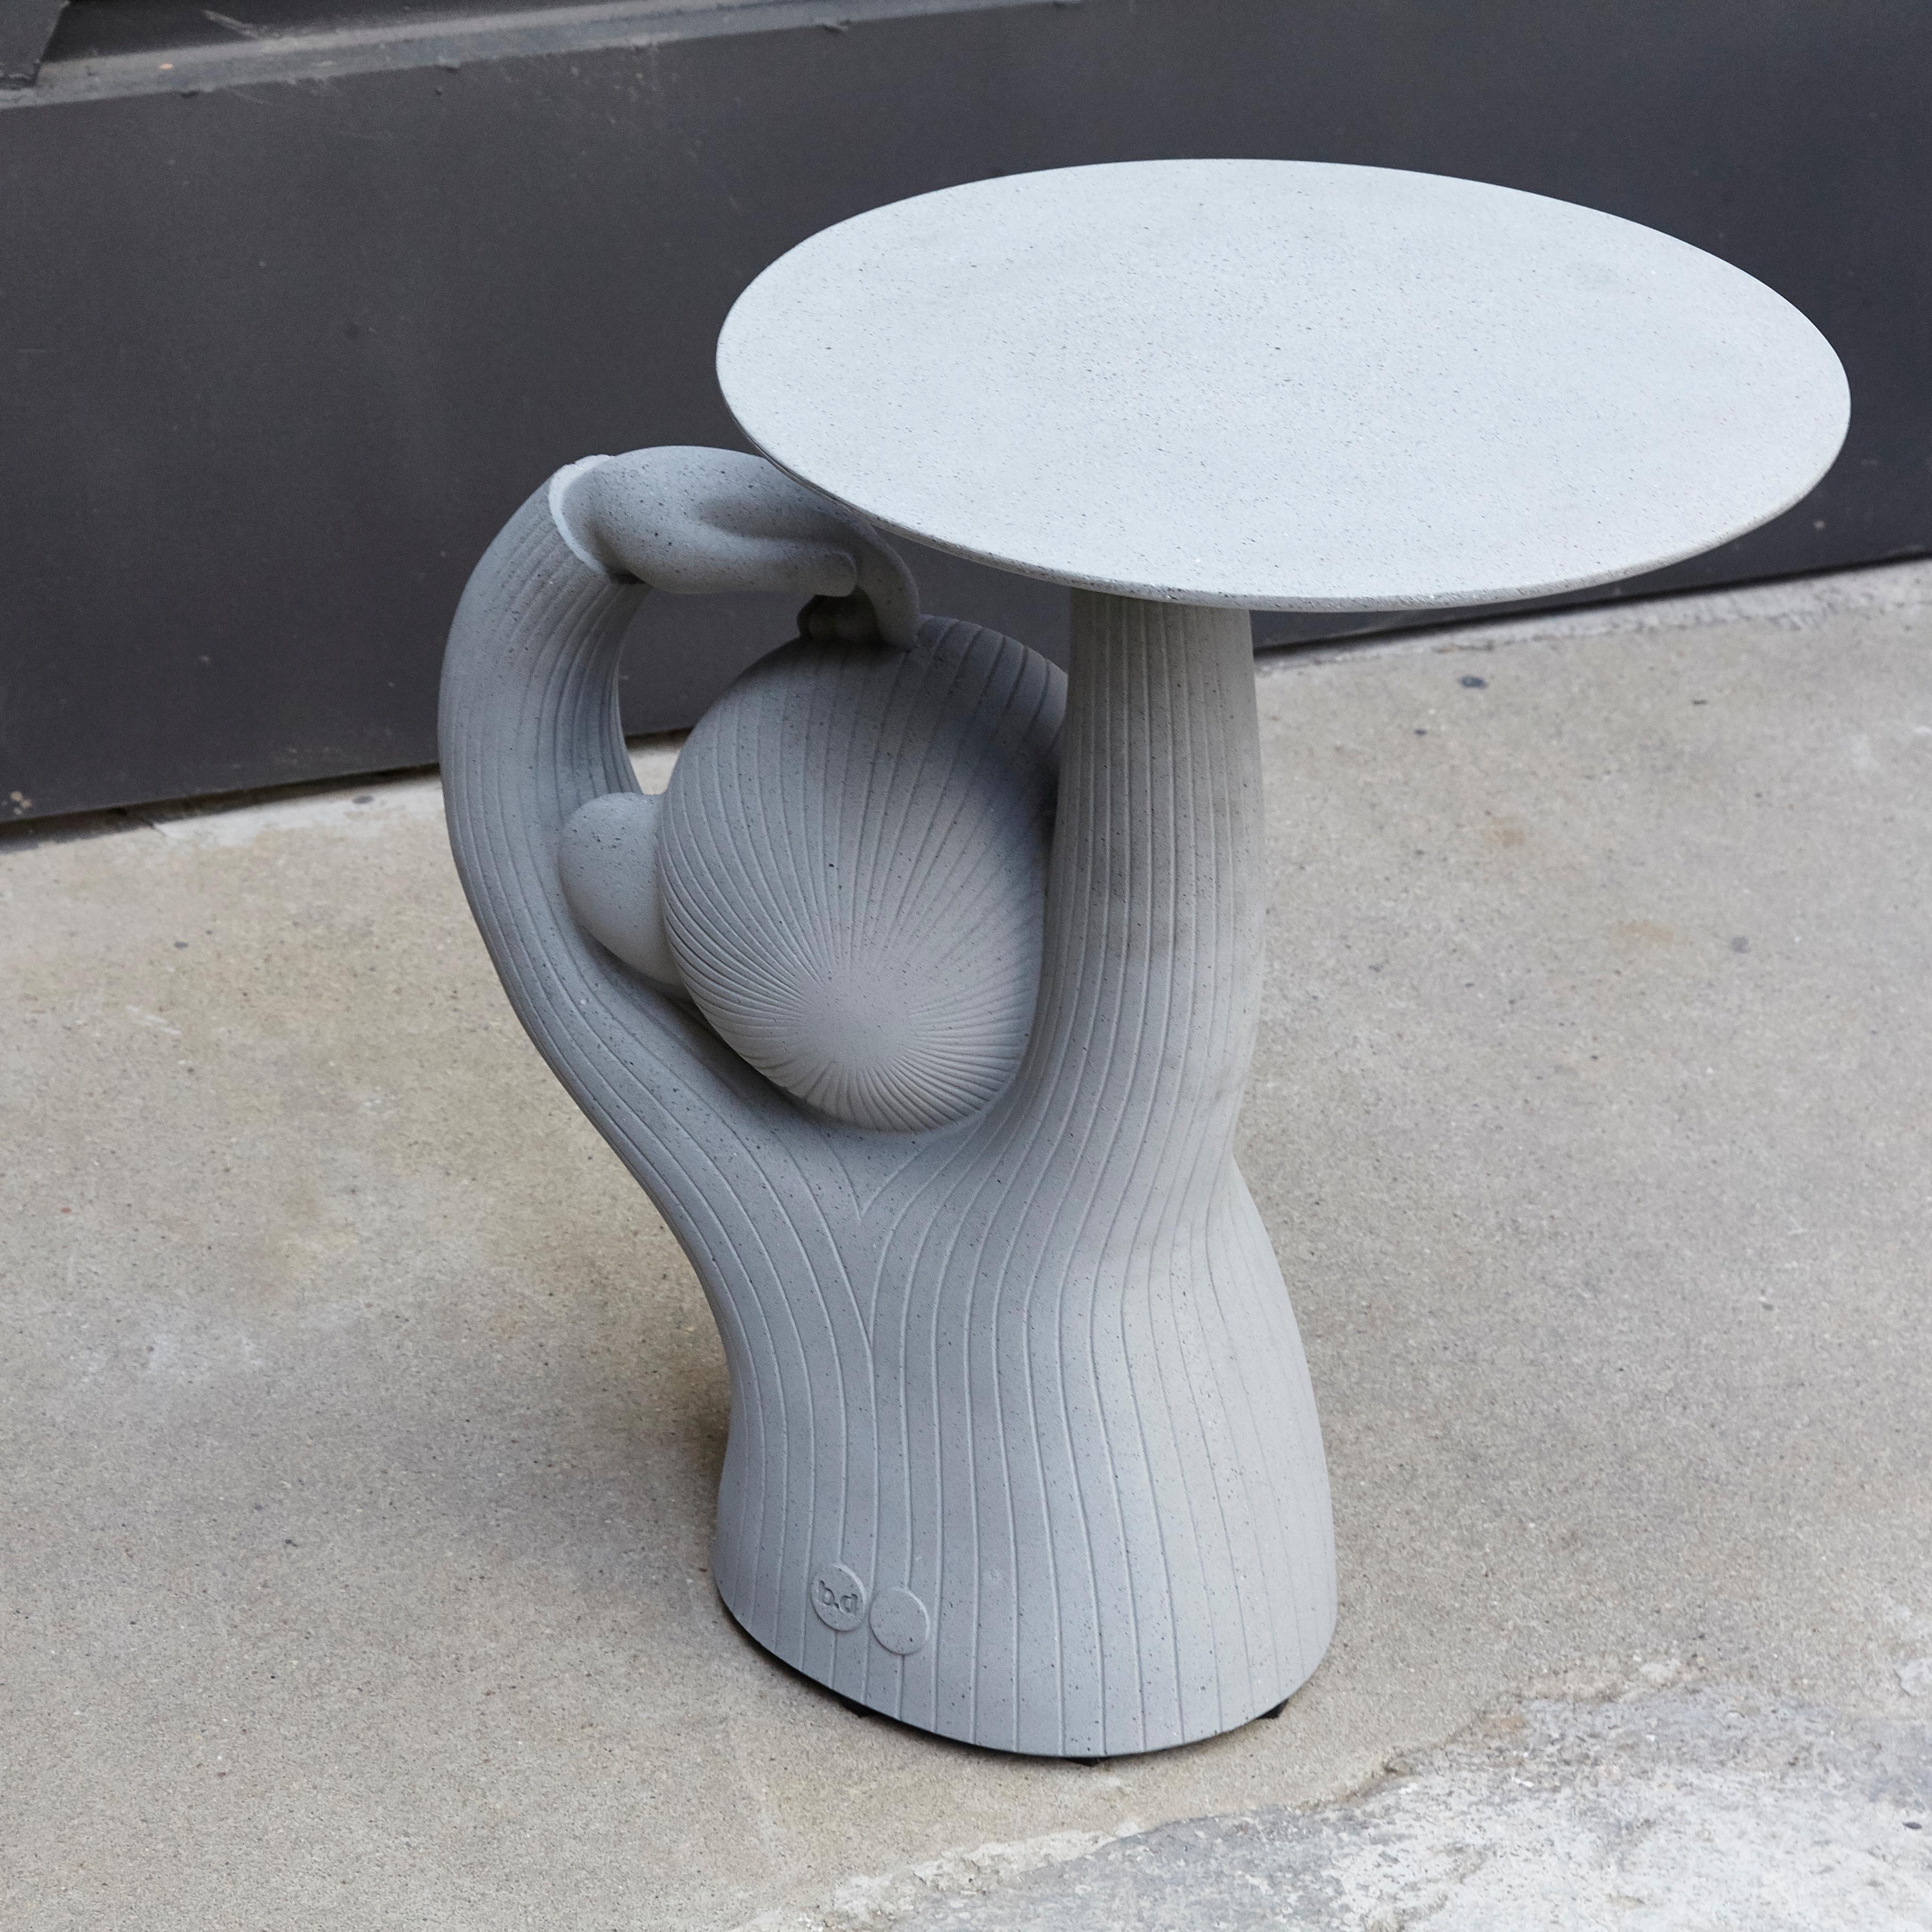 Monkey side table. Design by Jaime Hayon, 2016
Manufactured by BD Barcelona

Side table in one solid architectural concrete in grey. 
Includes regulatory glides.

Important information regarding images of products:
Please note that some of